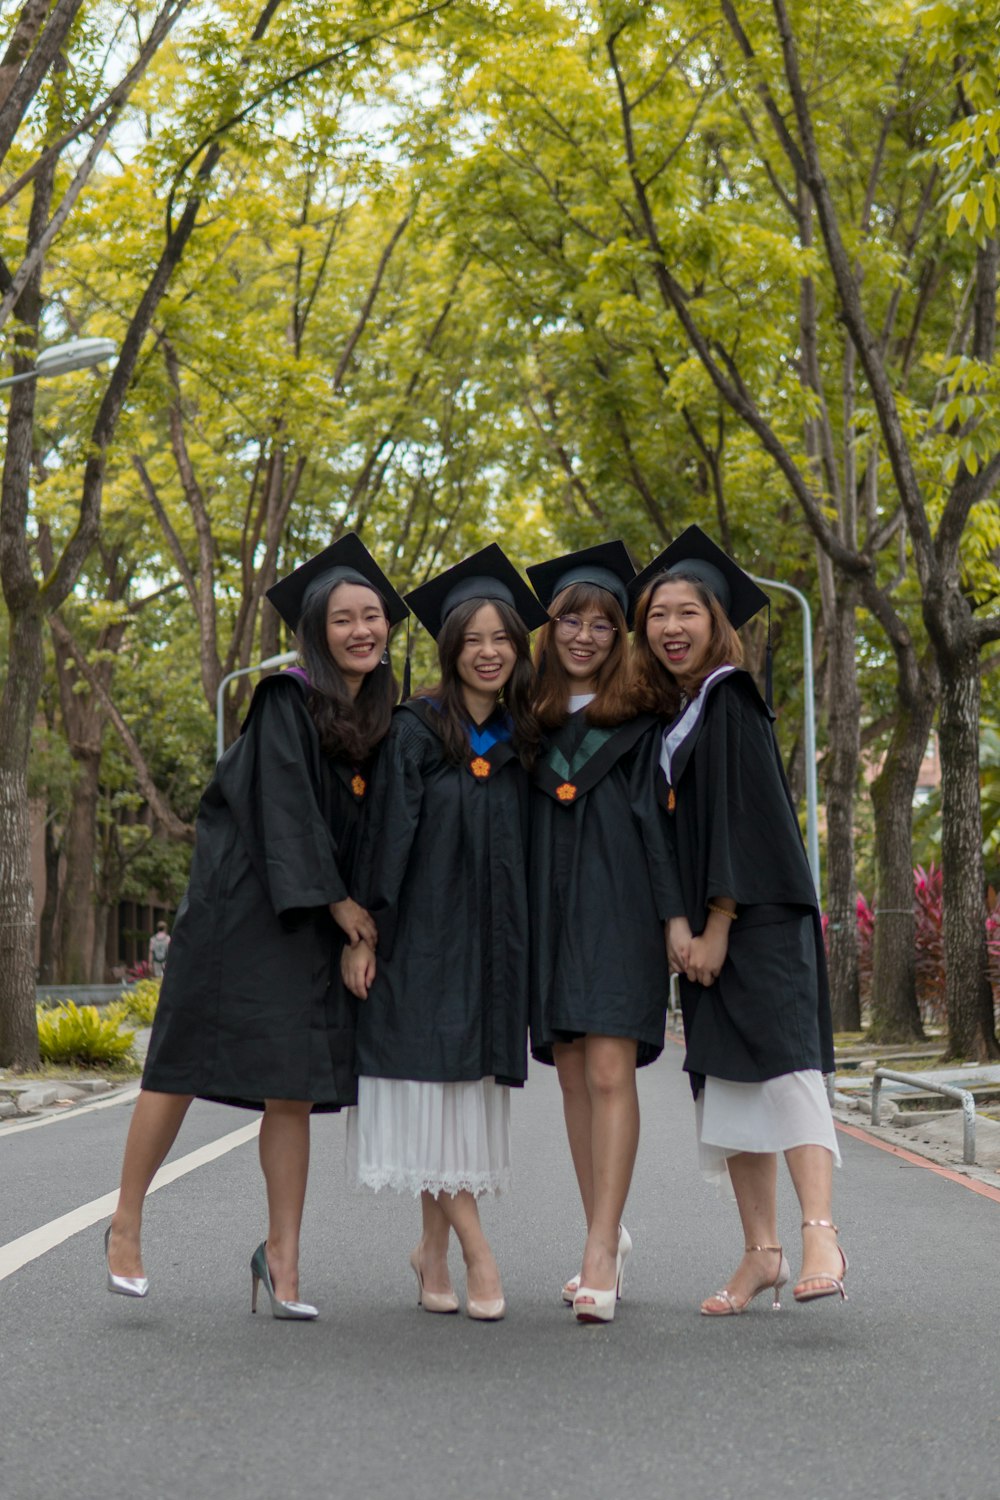 four women in blac academic dresses standing on road between trees